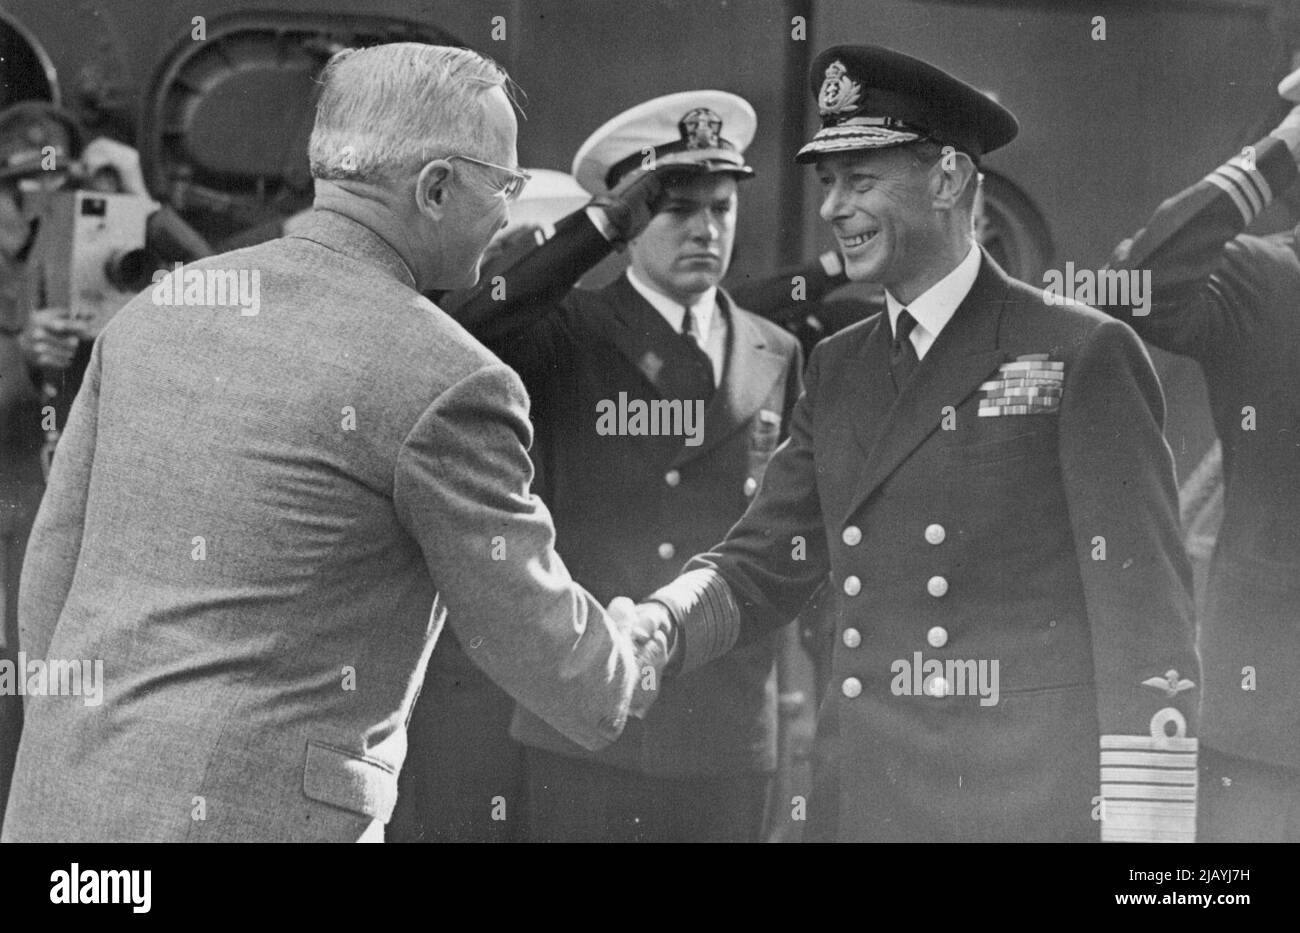 President Truman received by The King in Plymouth Sound - His Majesty shakes hands with President Truman on bearding the cruiser Augusta. President Truman, who flew to England after the Potsdam Conference, was received by the King on board the battle-cruiser H.M.S. Renown in Plymouth Sound, before he sailed to the United States in the American cruiser Augusta. During his visit to England the President saw the Barbican Stone and Mayflower Steps, where the Pilgrim Fathers set sail for New England in 1620. August 02, 1945. Stock Photo